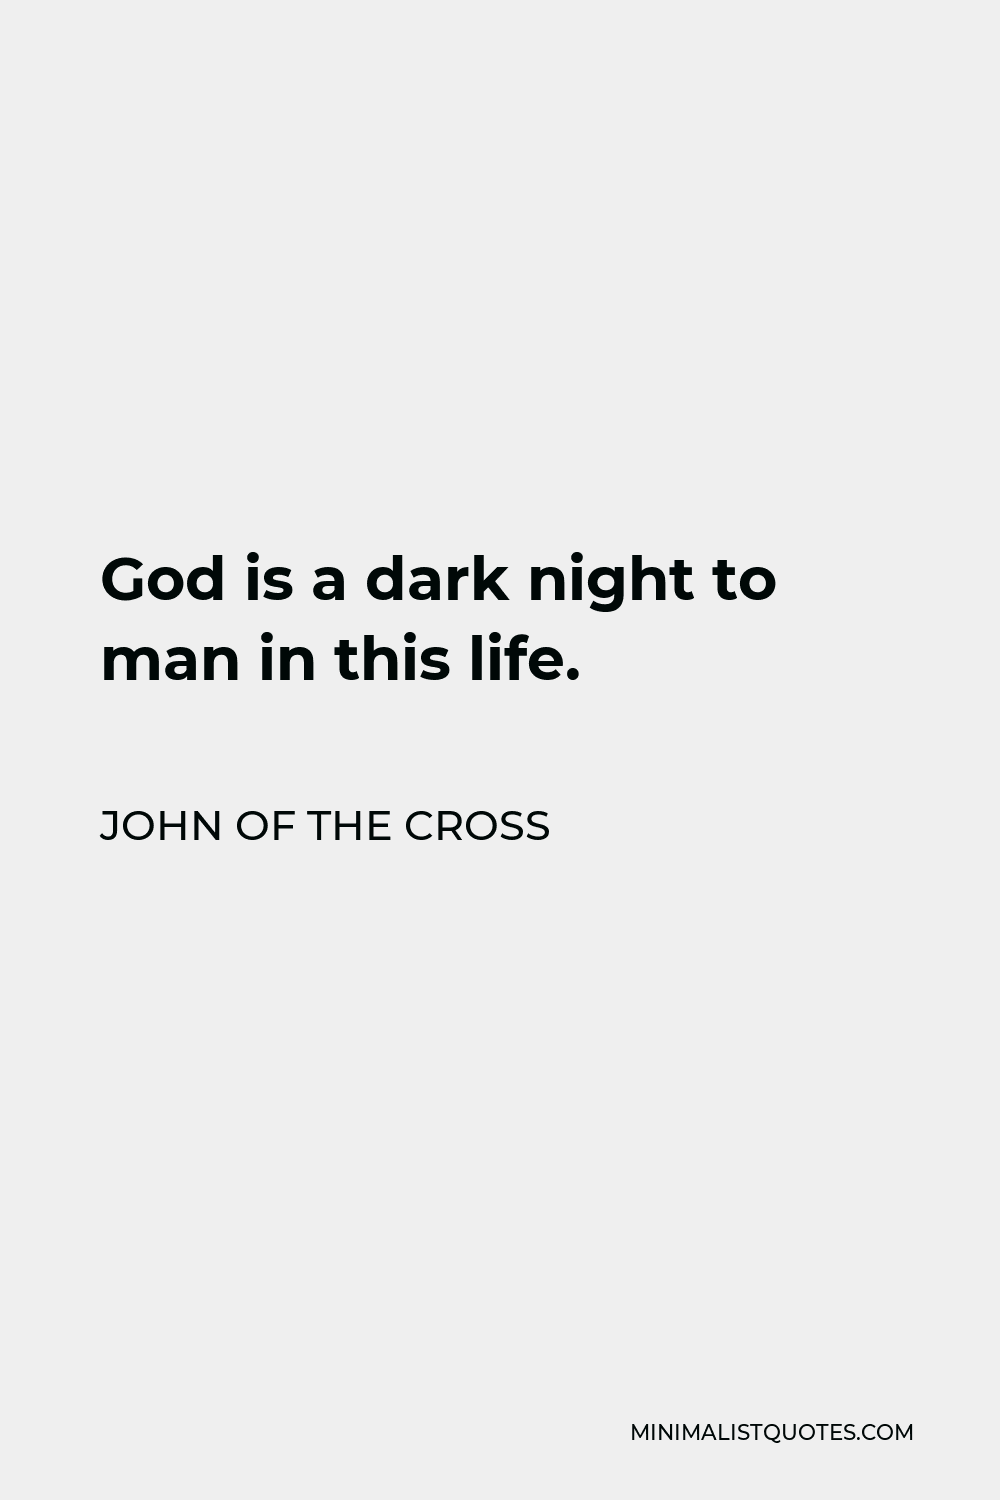 John of the Cross Quote - God is a dark night to man in this life.